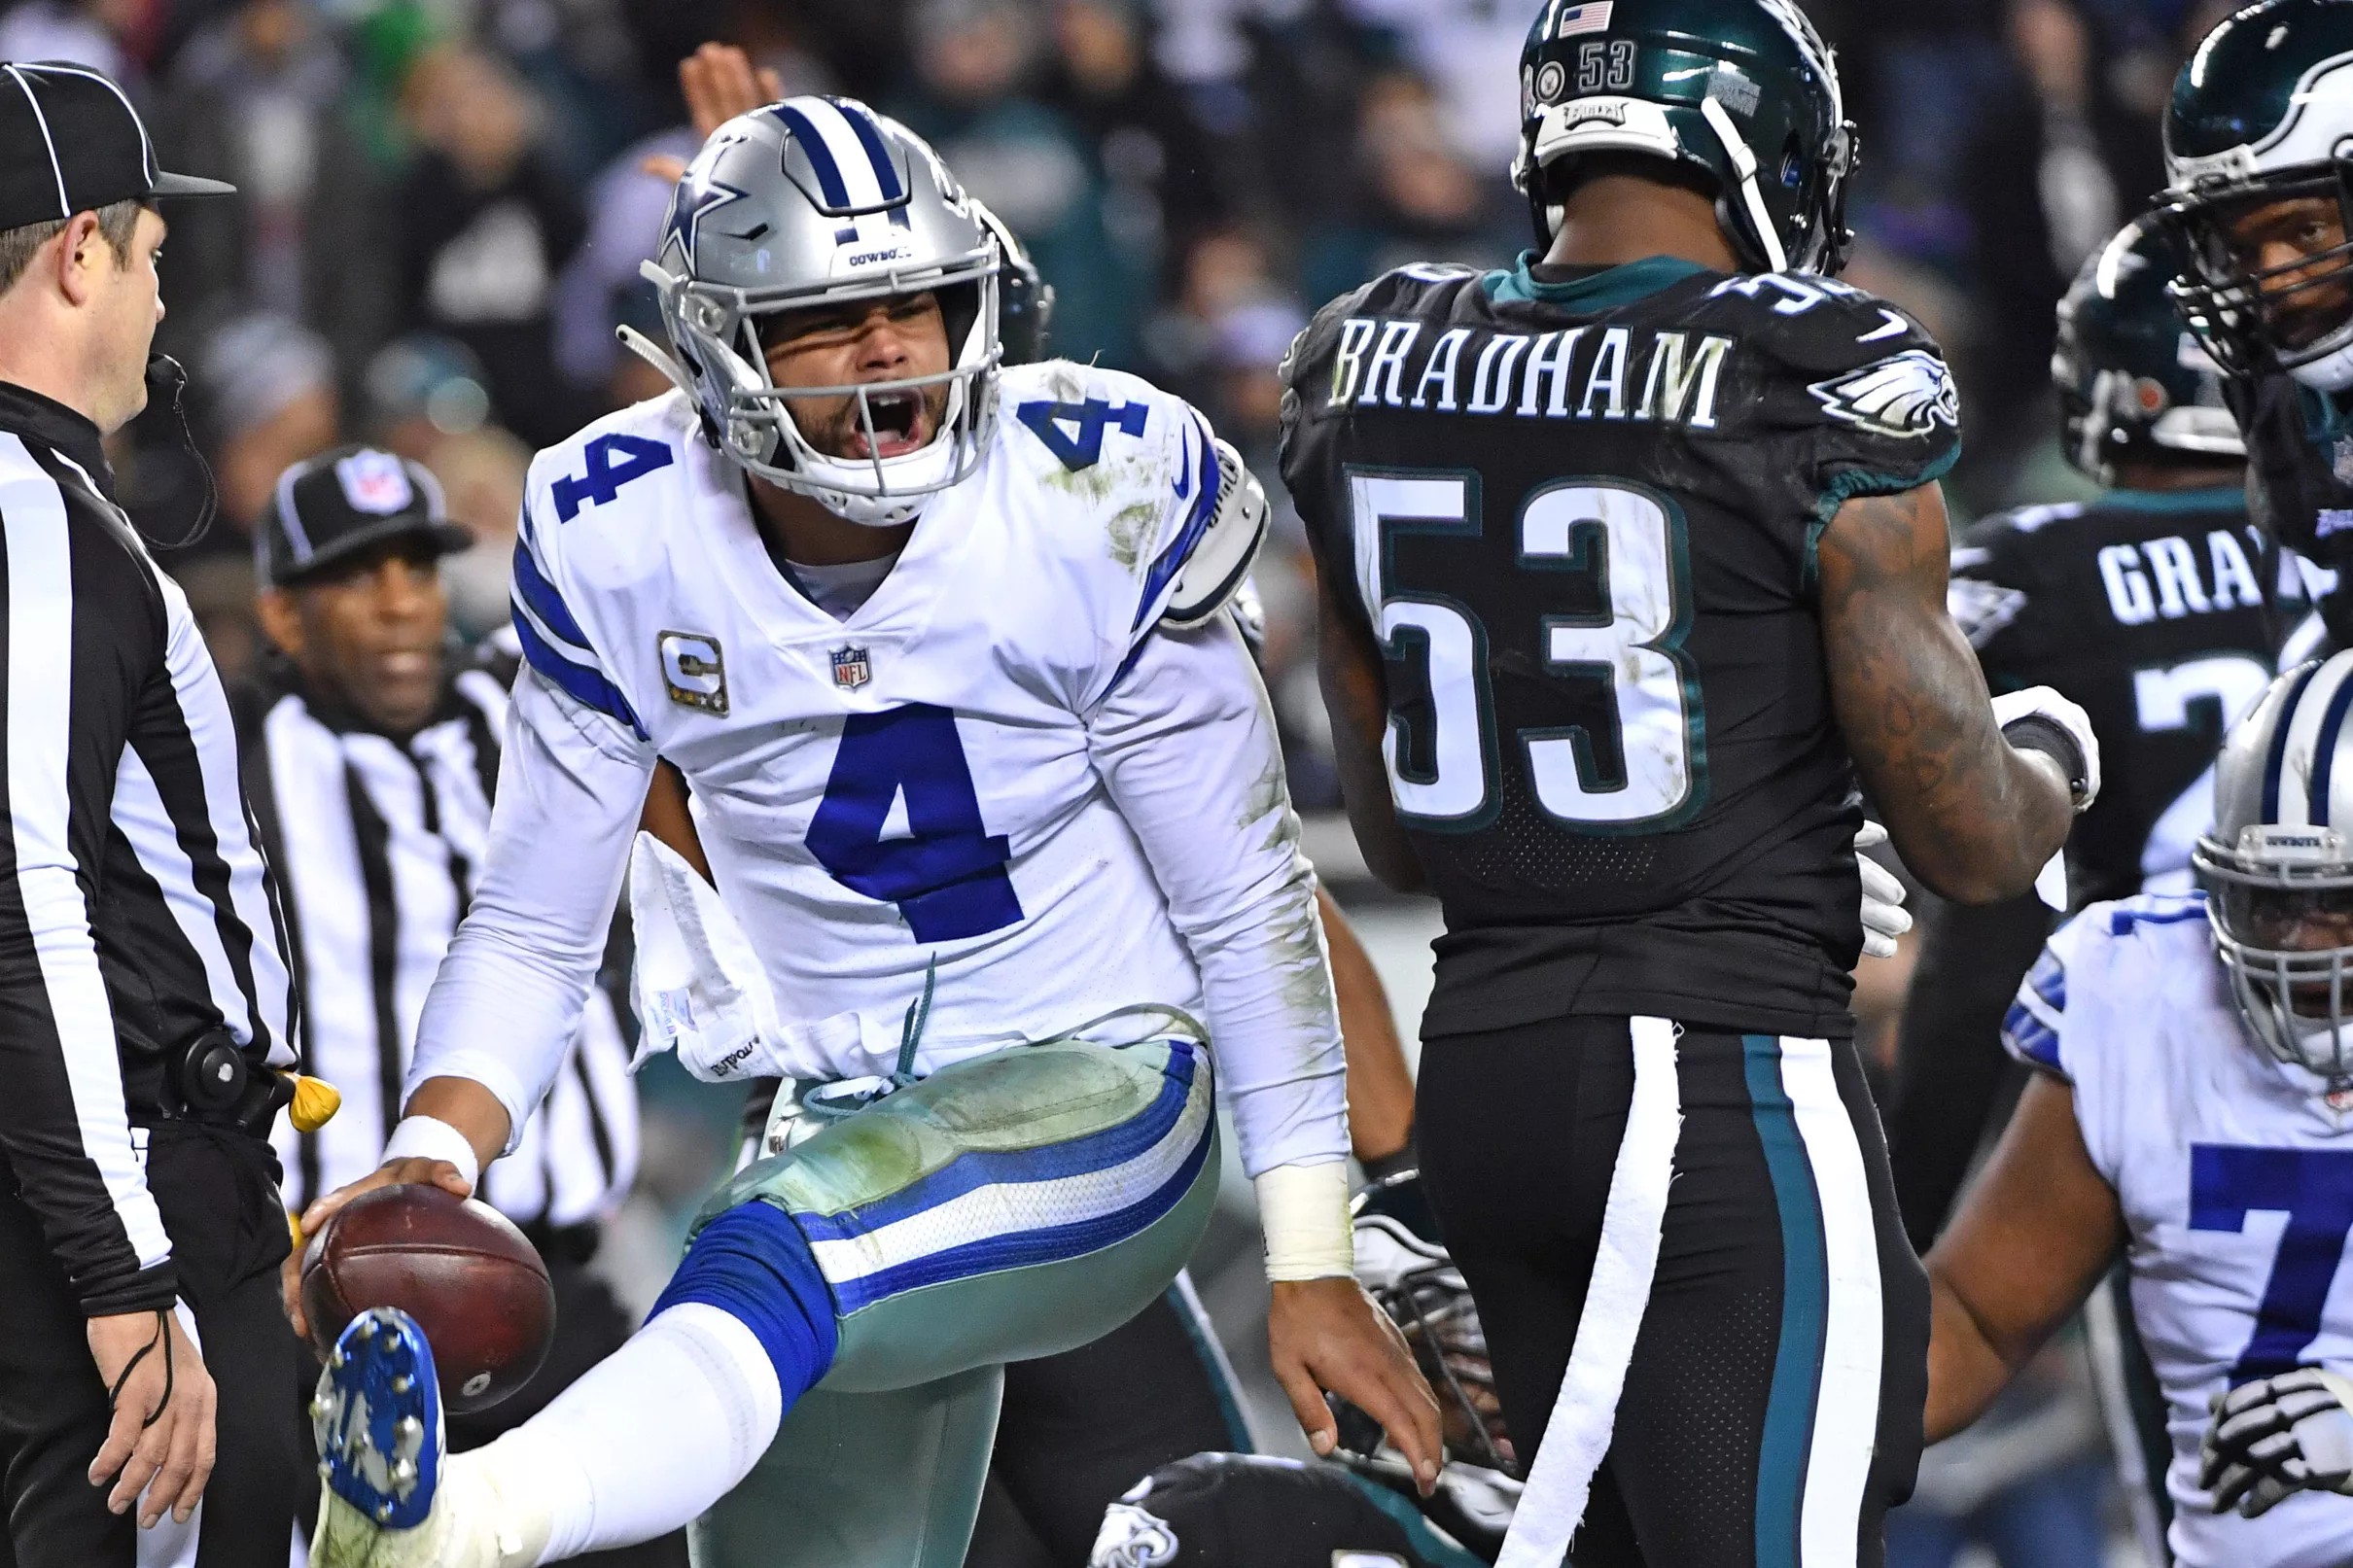 Cowboys vs. Eagles Week 14 game: How to watch, game time, TV schedule, online streaming, radio